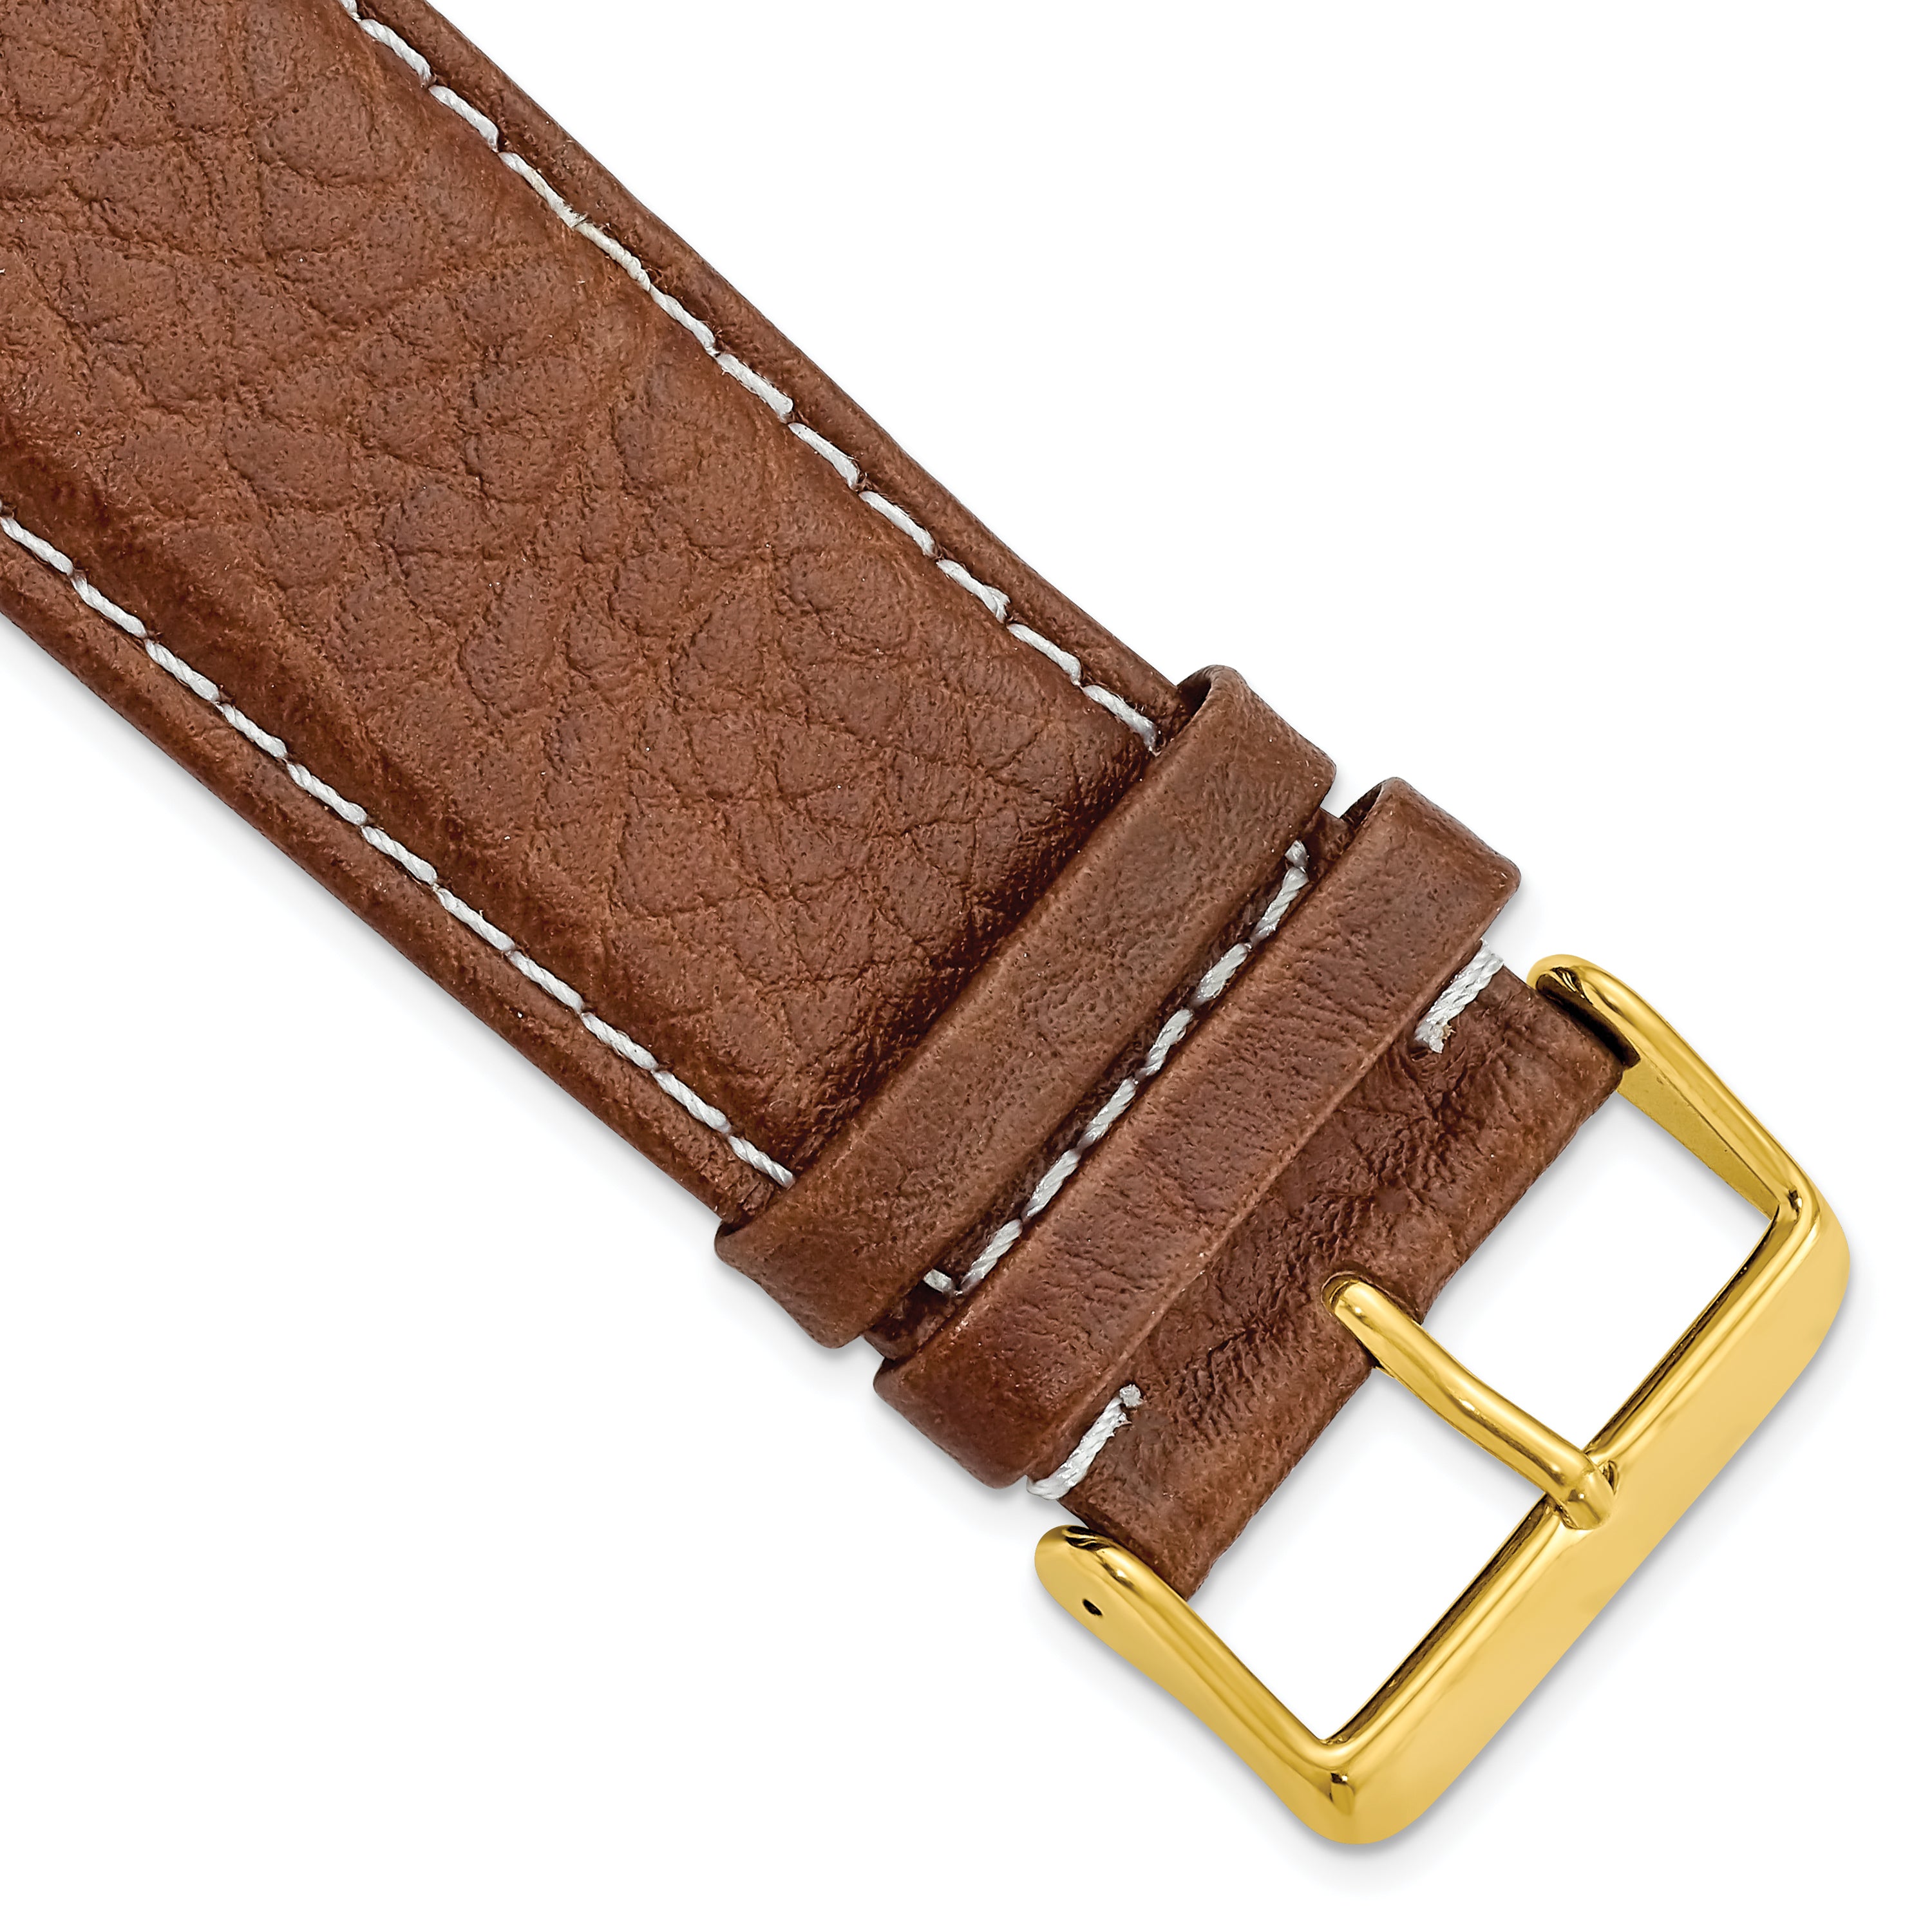 DeBeer 28mm Havana Sport Leather with White Stitching and Gold-tone Buckle 7.5 inch Watch Band